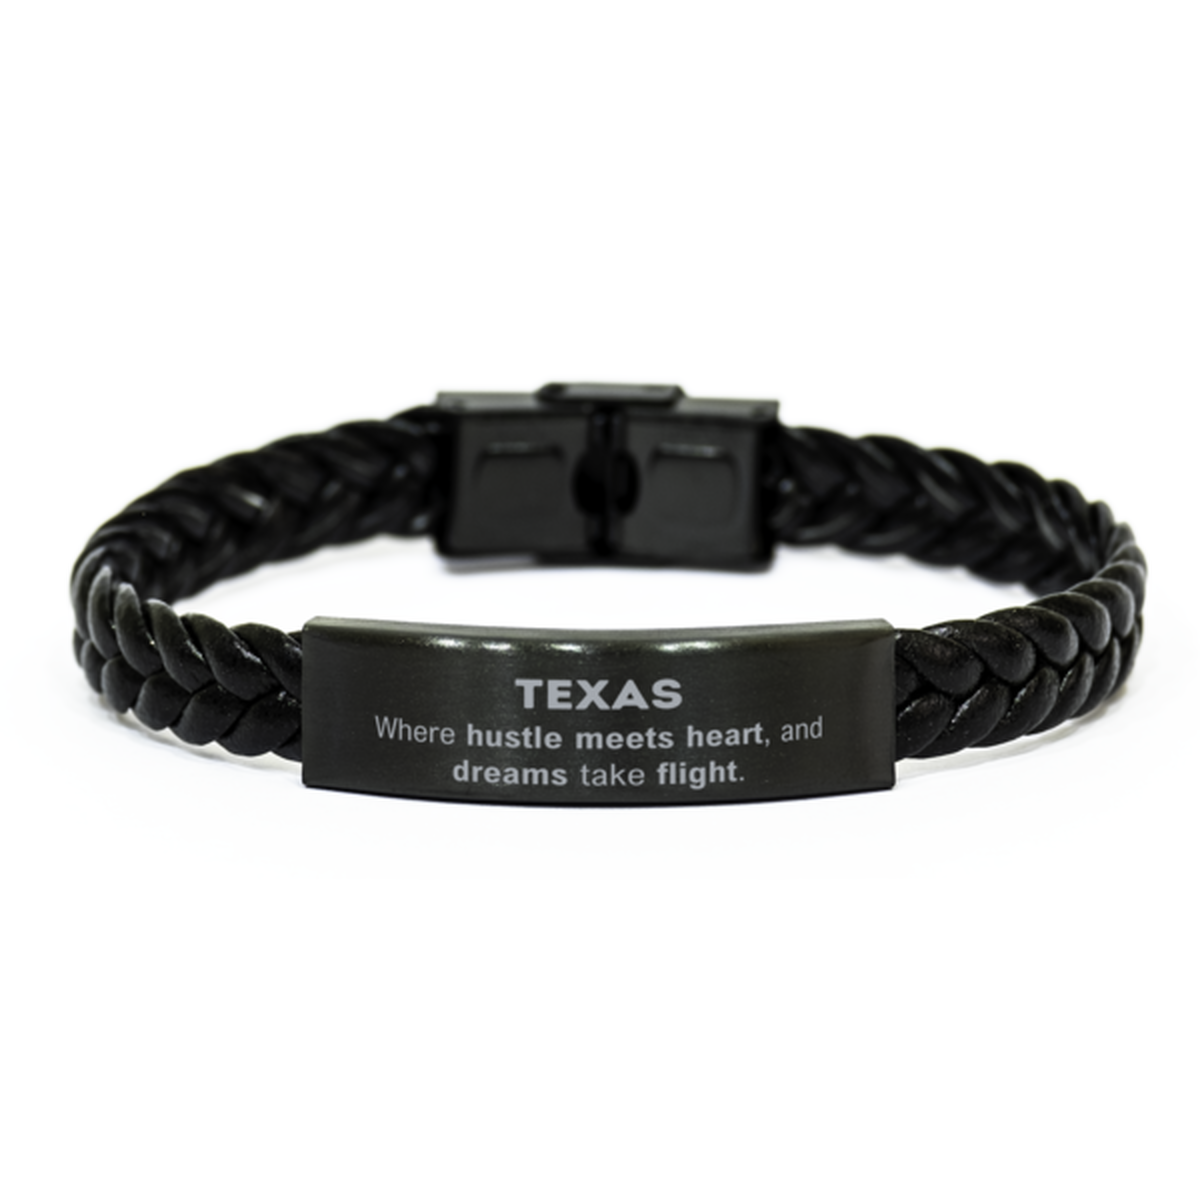 Texas: Where hustle meets heart, and dreams take flight, Texas Gifts, Proud Texas Christmas Birthday Texas Braided Leather Bracelet, Texas State People, Men, Women, Friends